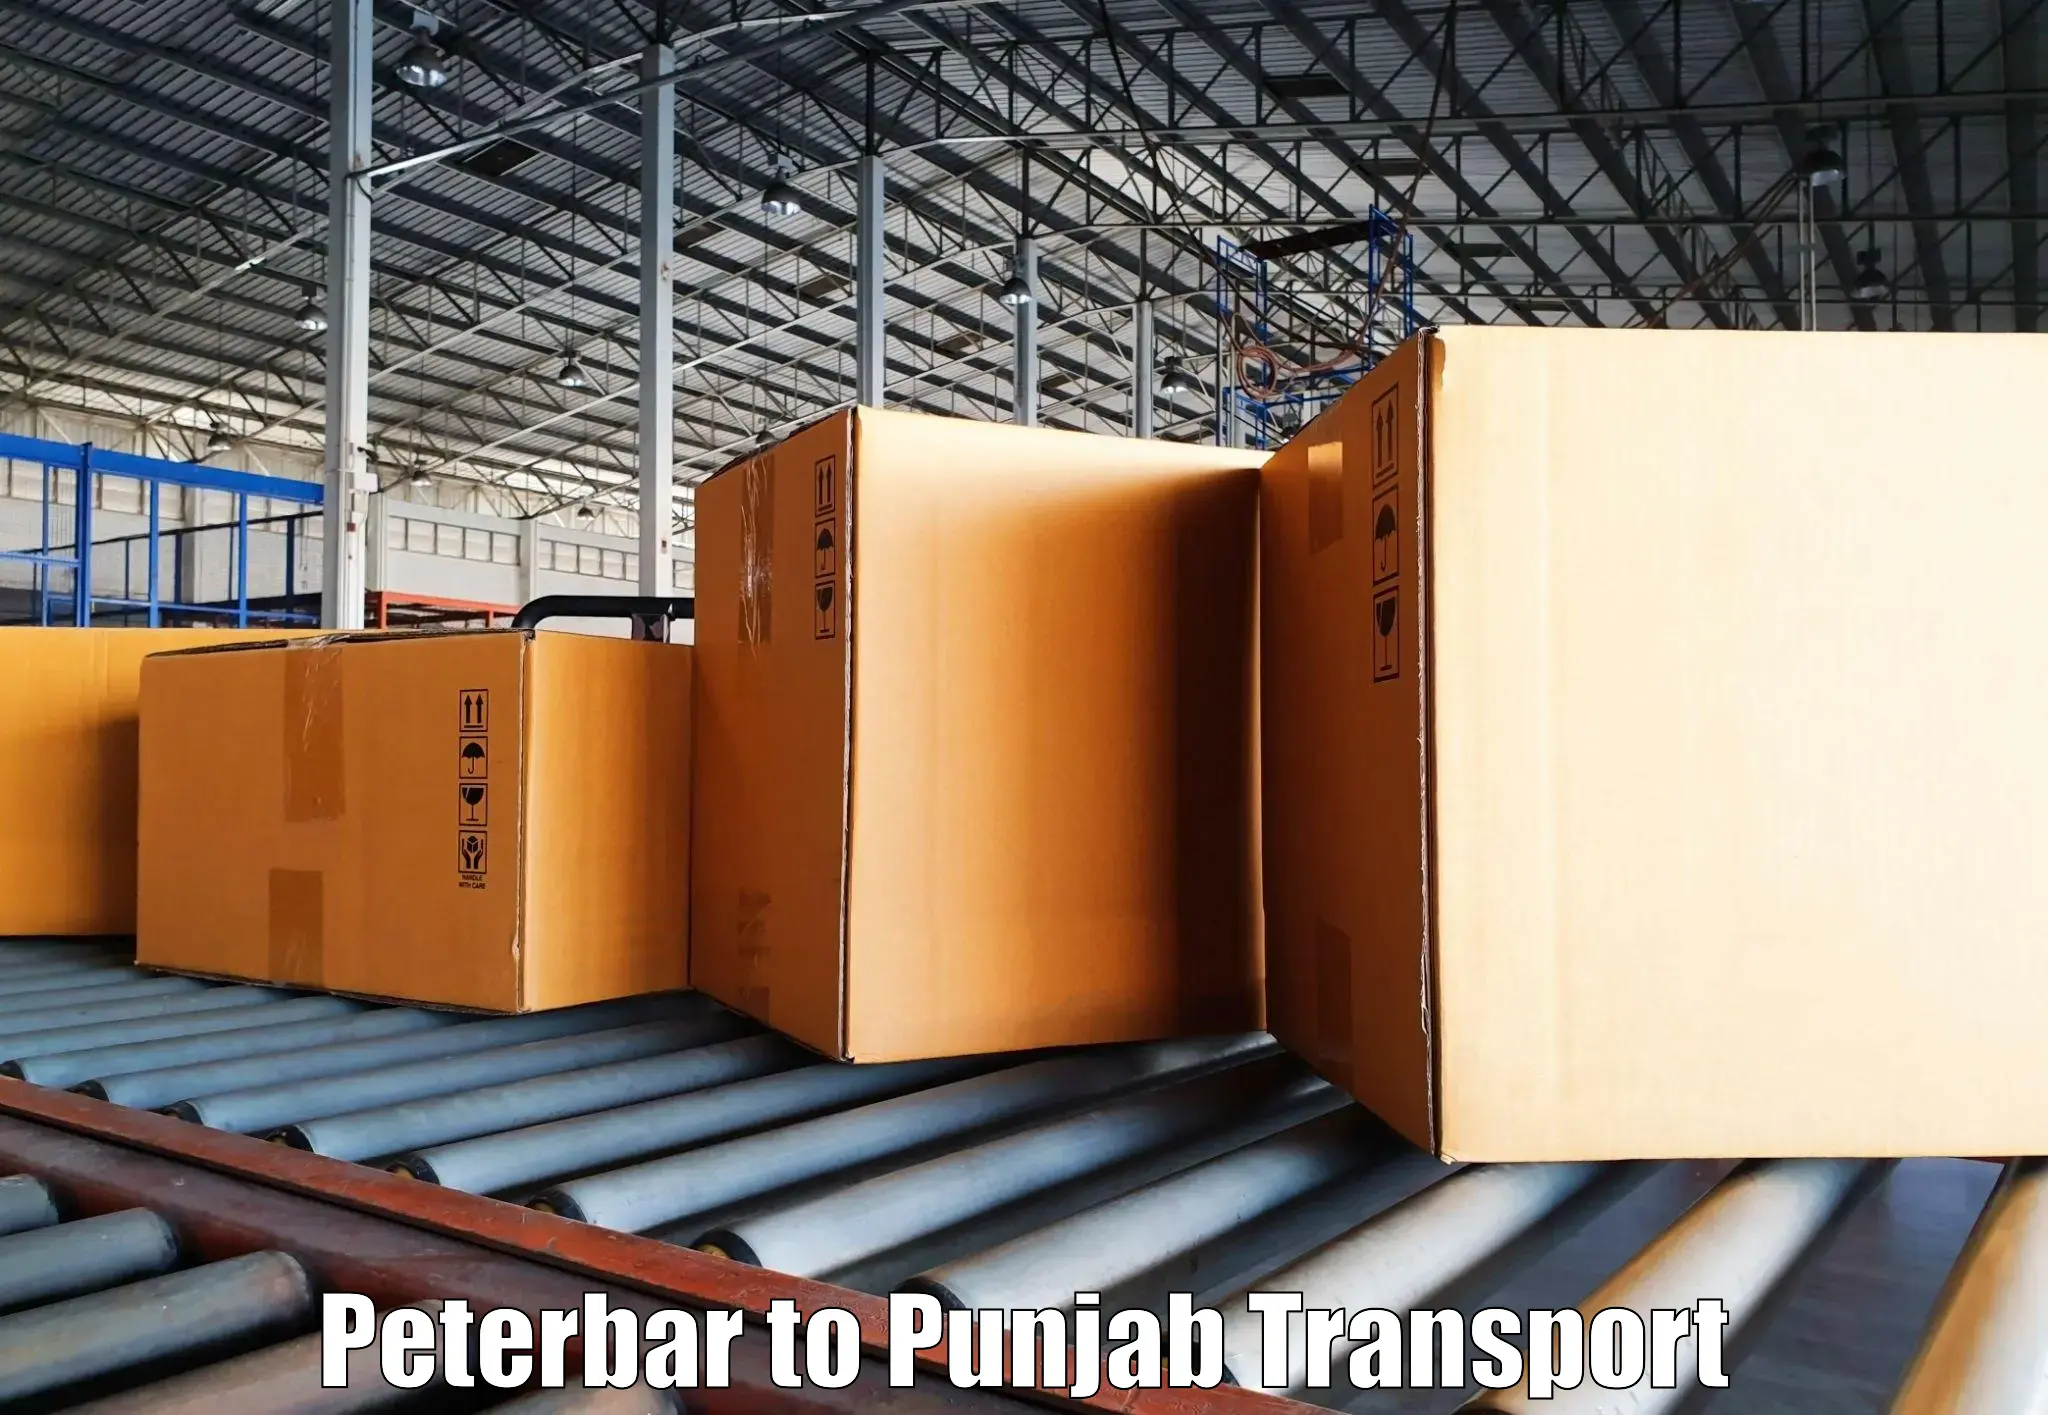 Two wheeler transport services Peterbar to Mohali